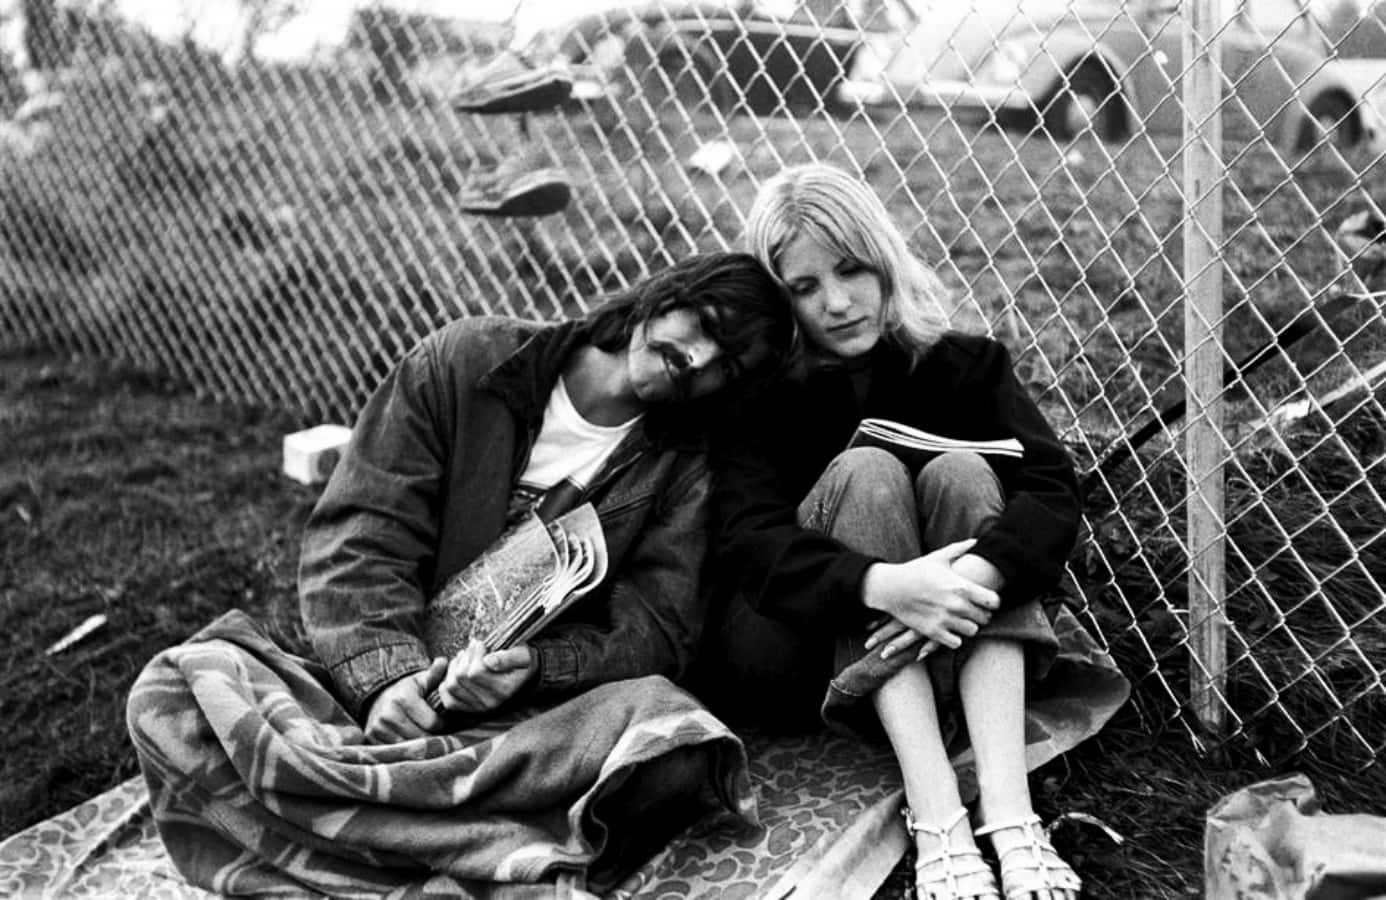 A Man And Woman Sitting On The Ground Next To A Fence